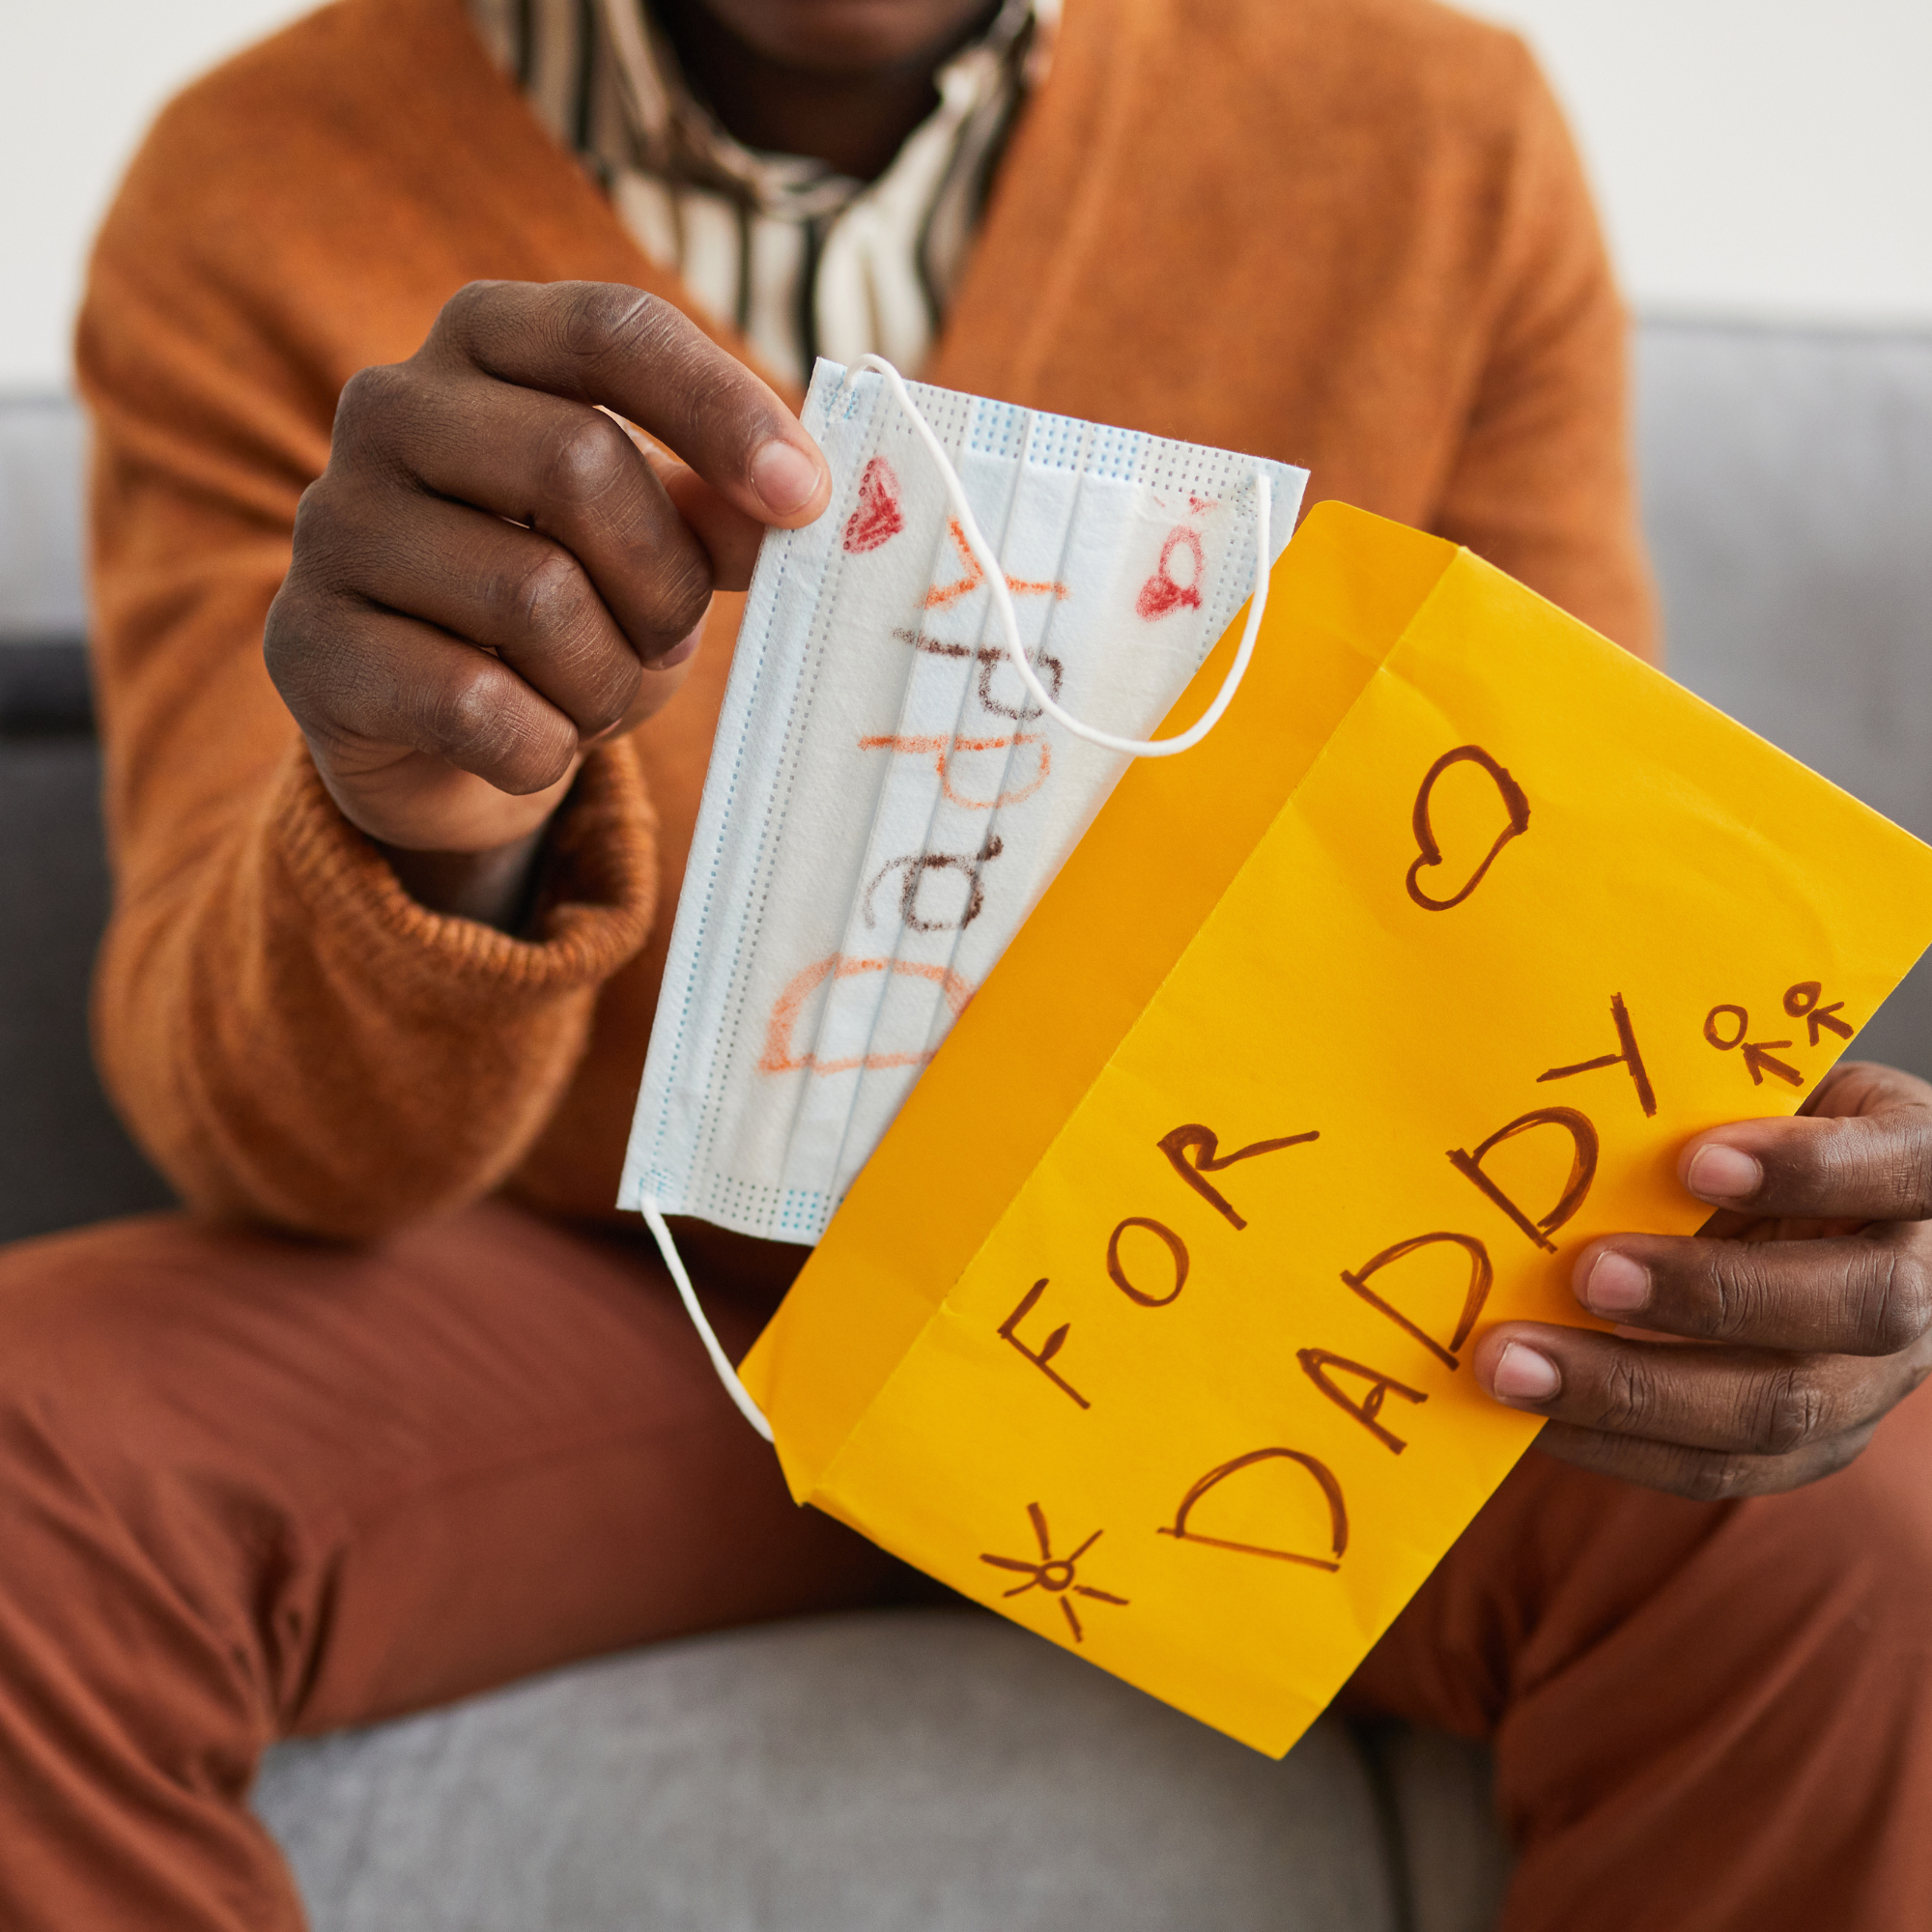 Dad wearing a mustard yellow jacket sat on a grey sofa holding his homemade Father's Day card from his child | Family Time - Clair de Lune UK